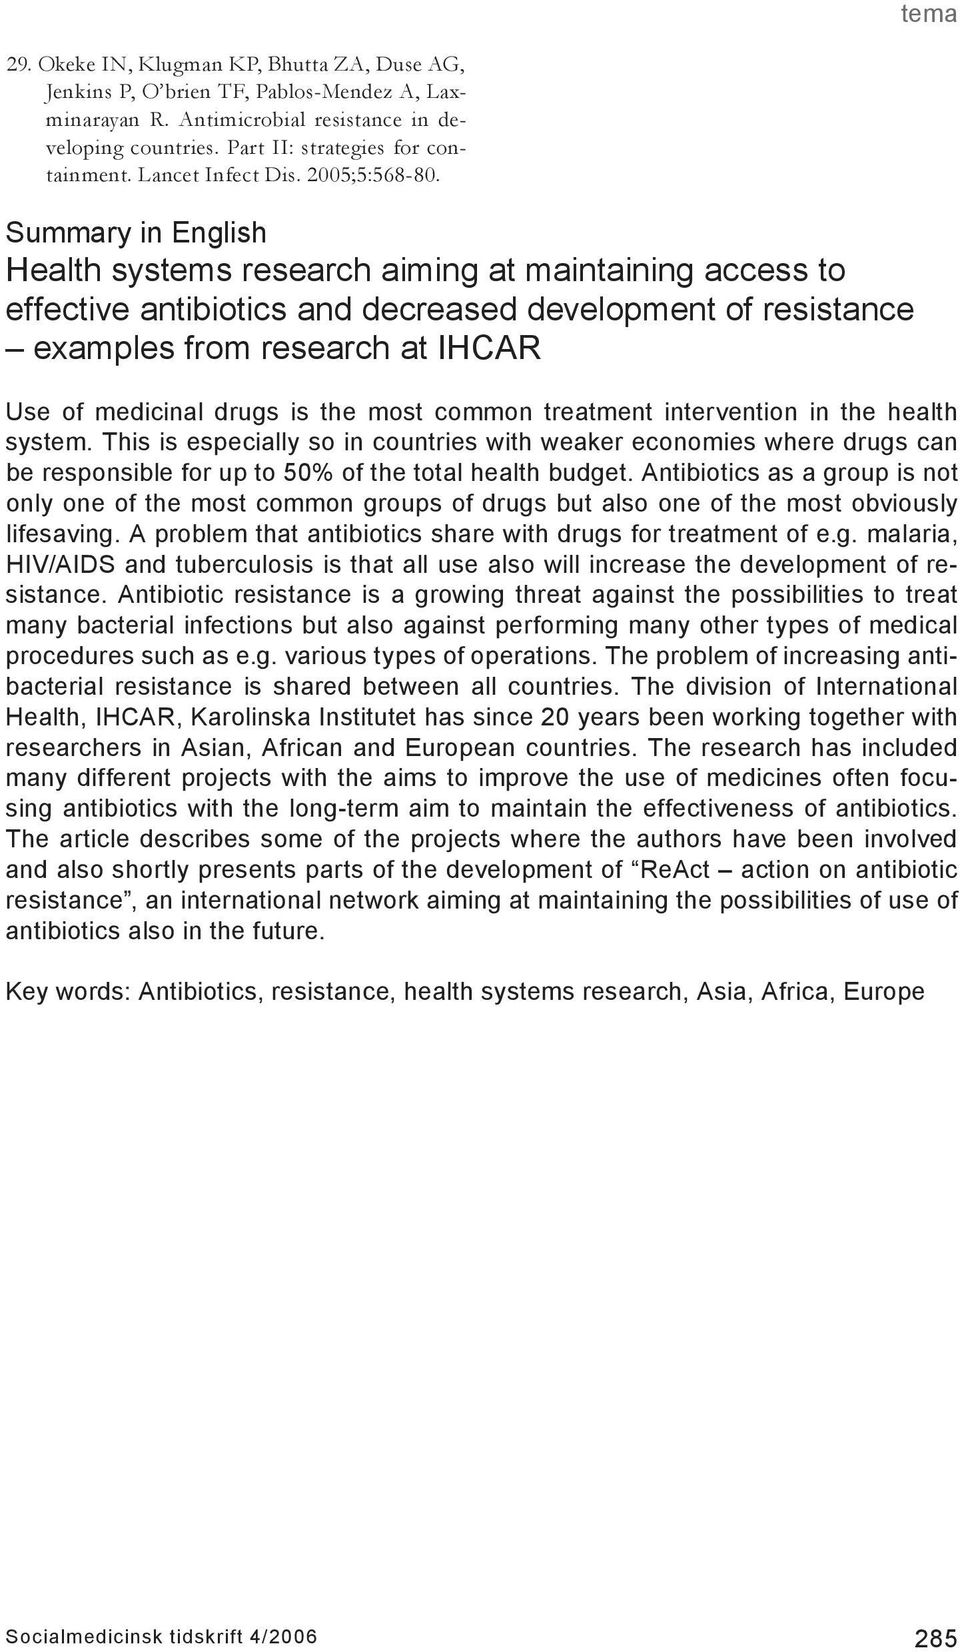 Summary in English Health systems research aiming at maintaining access to effective antibiotics and decreased development of resistance examples from research at IHCAR Use of medicinal drugs is the